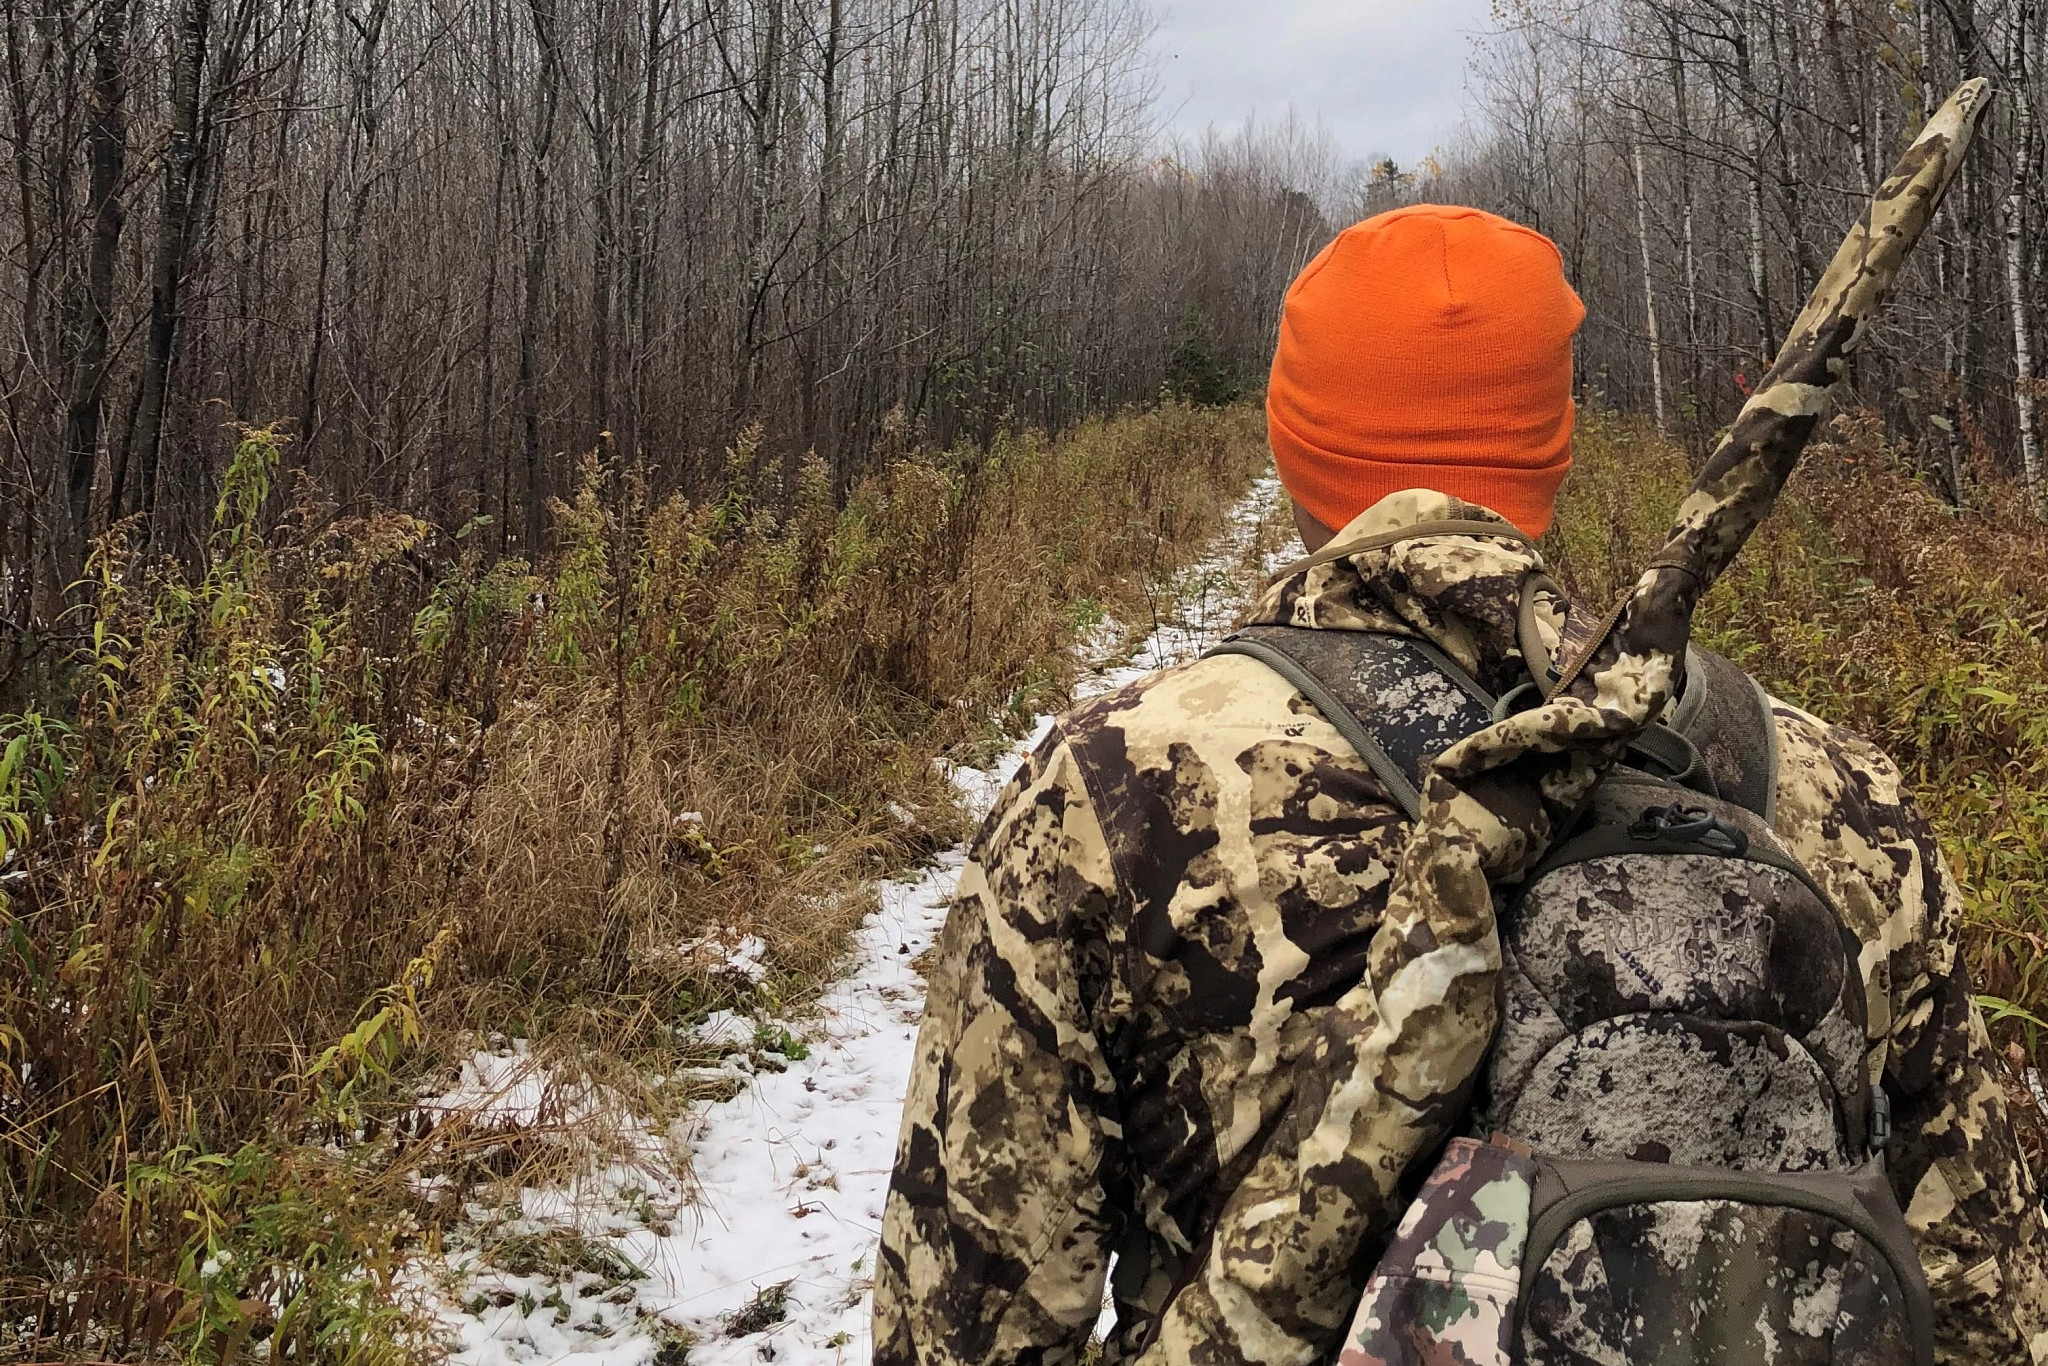 The back of hunter Jed Becker is visible as he walks wearing camo and a blaze orange hat.